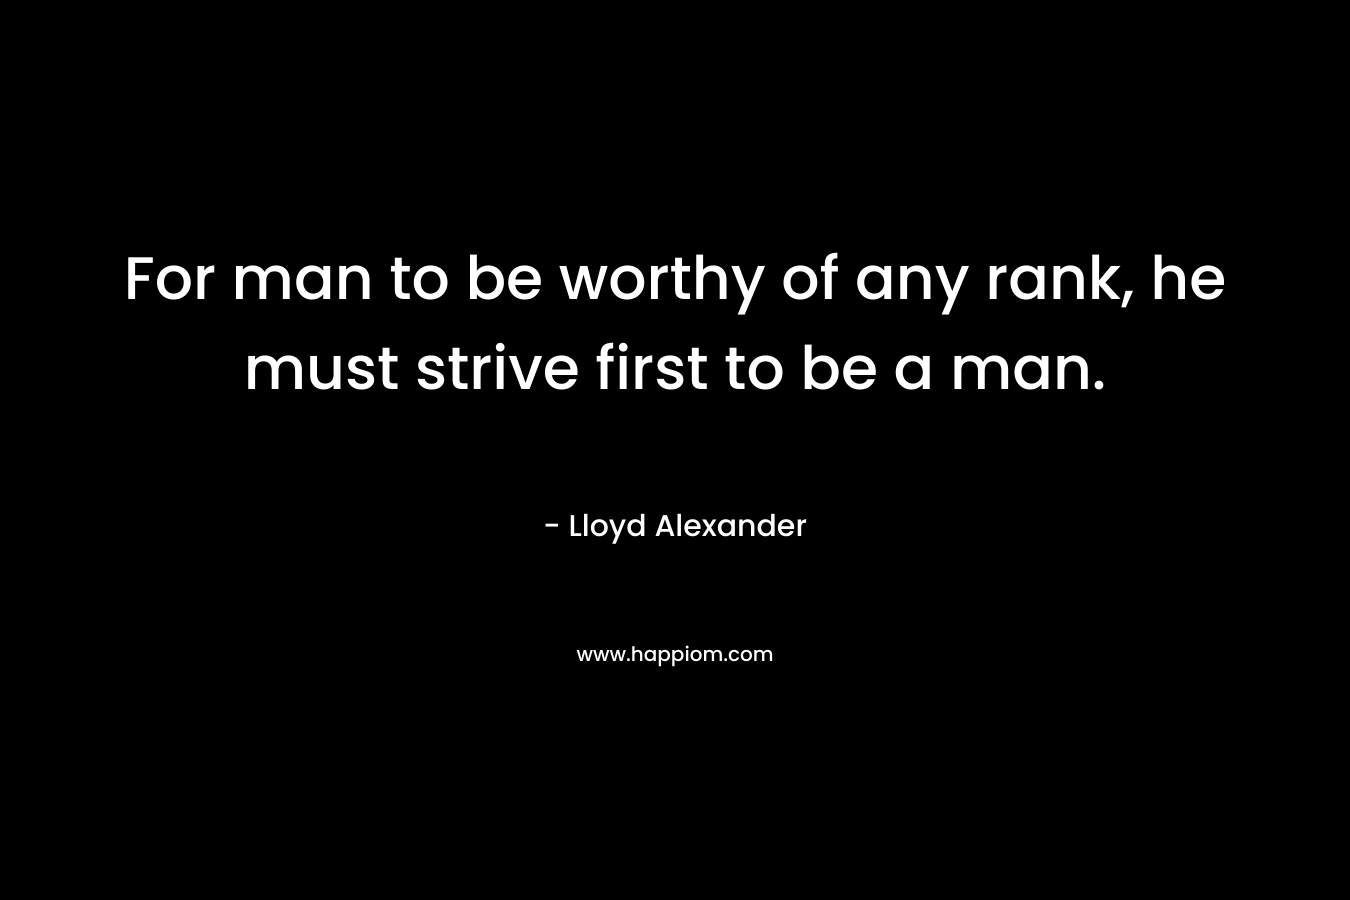 For man to be worthy of any rank, he must strive first to be a man.